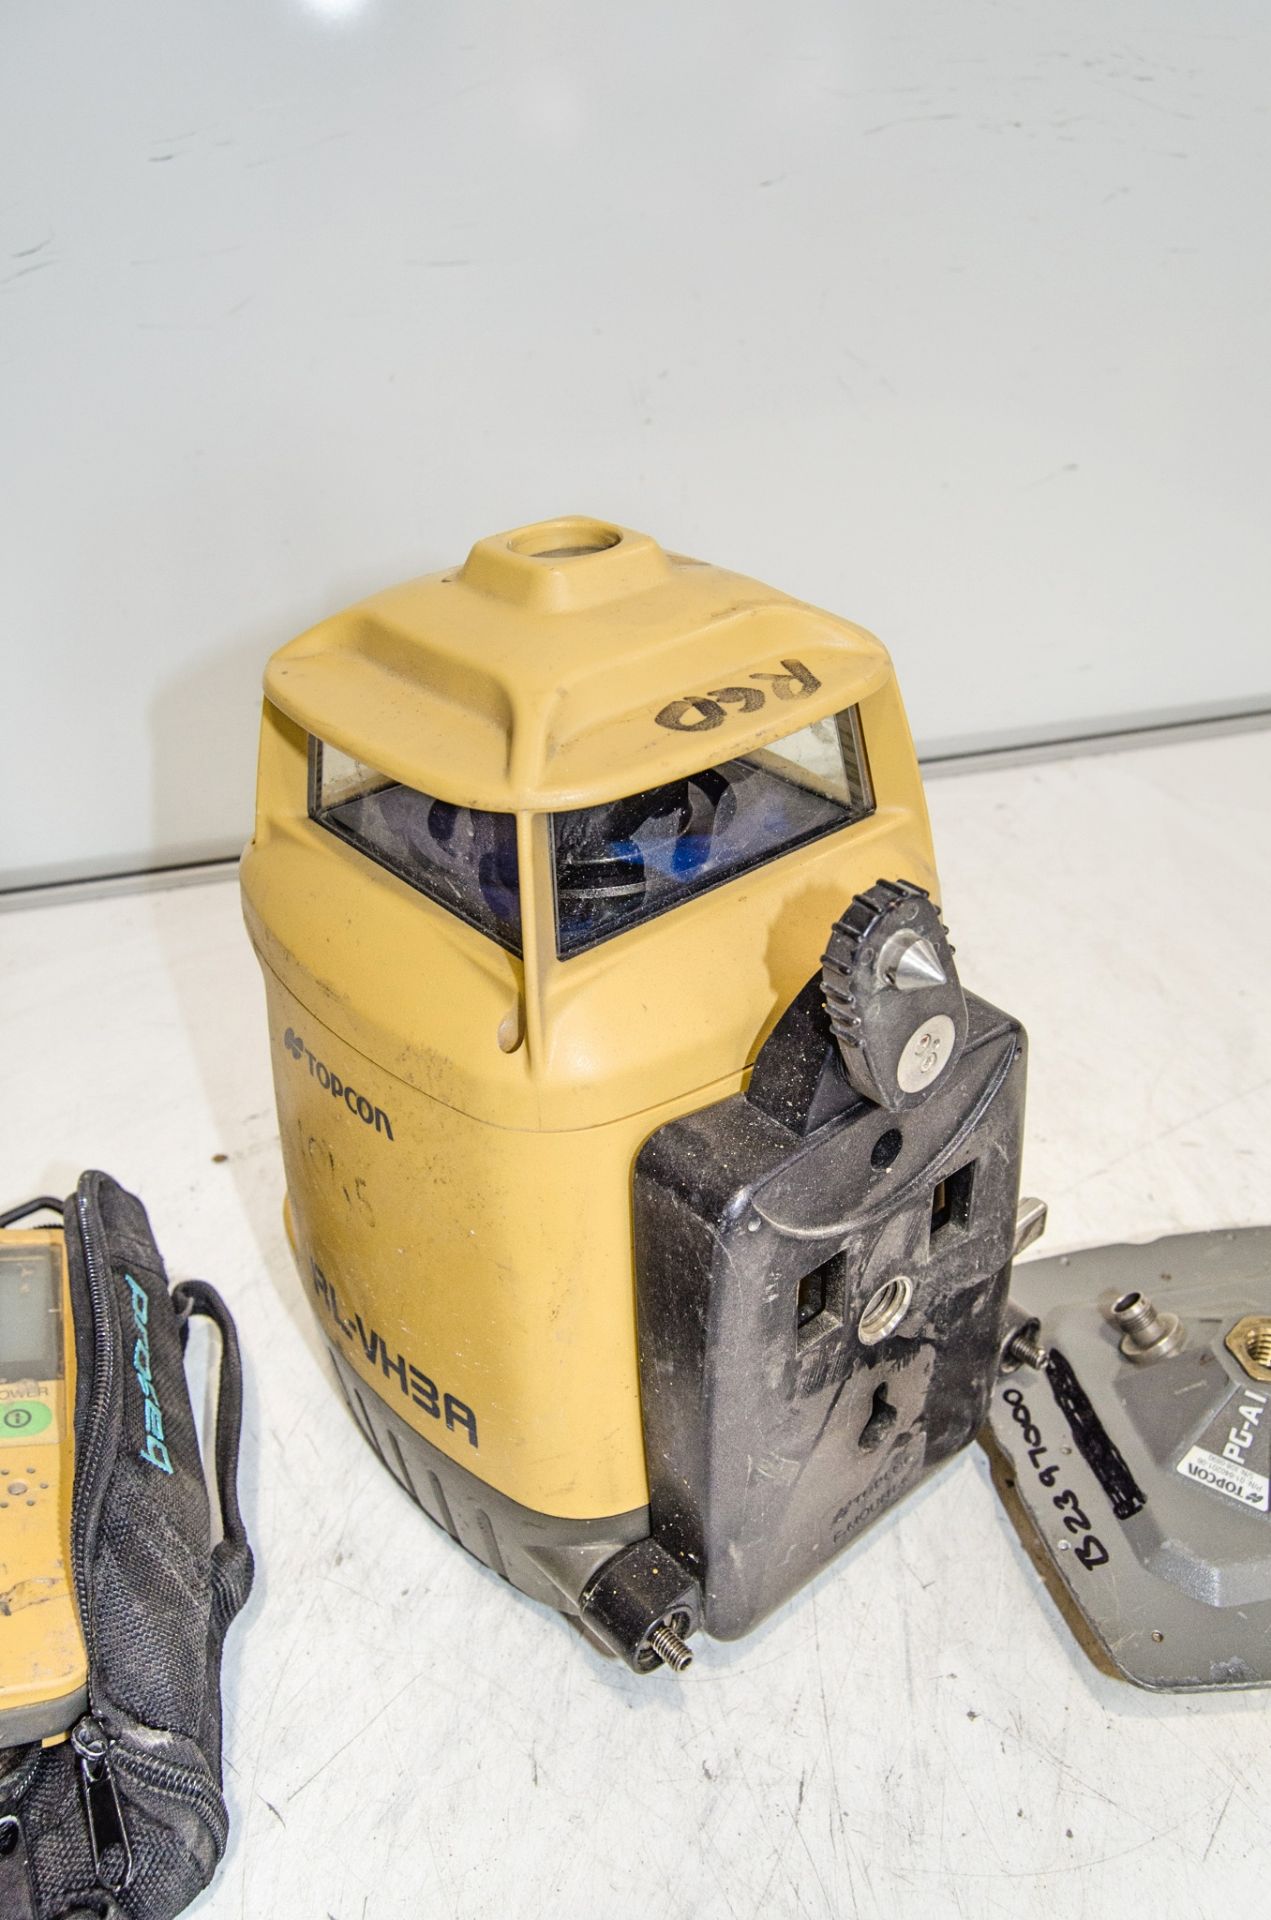 Topcon RLVH3A rotating laser level c/w LS70-C receiver and PG-A1 antenna ** No charger or battery ** - Bild 2 aus 2